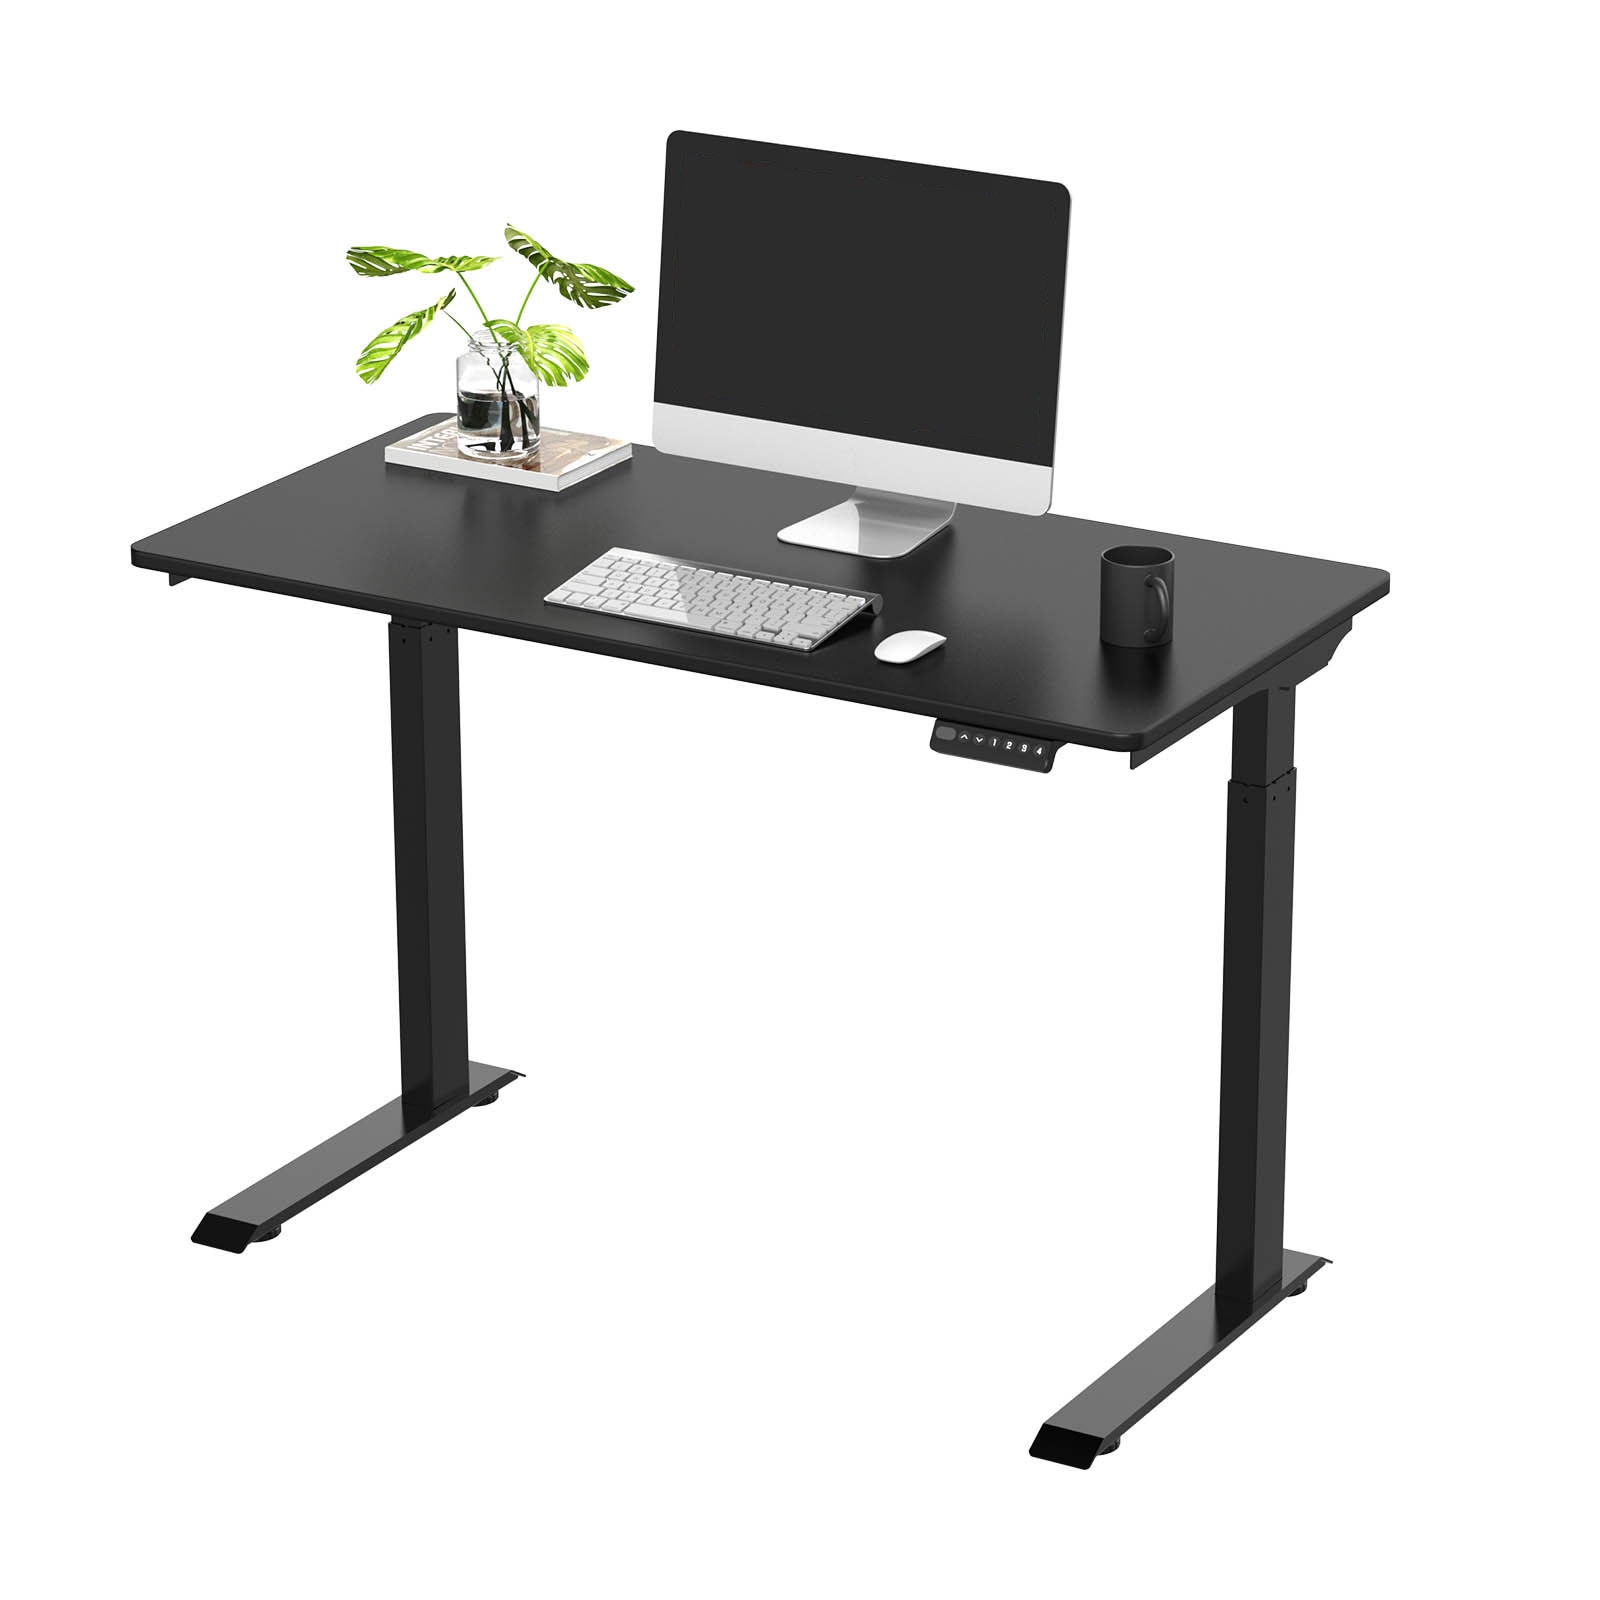 FLEXISPOT Standing Desk 48 x 30 Inches Height Adjustable Electric Sit Stand  Home Office Desks Whole Piece Desk Board (Black Frame + Black top,2